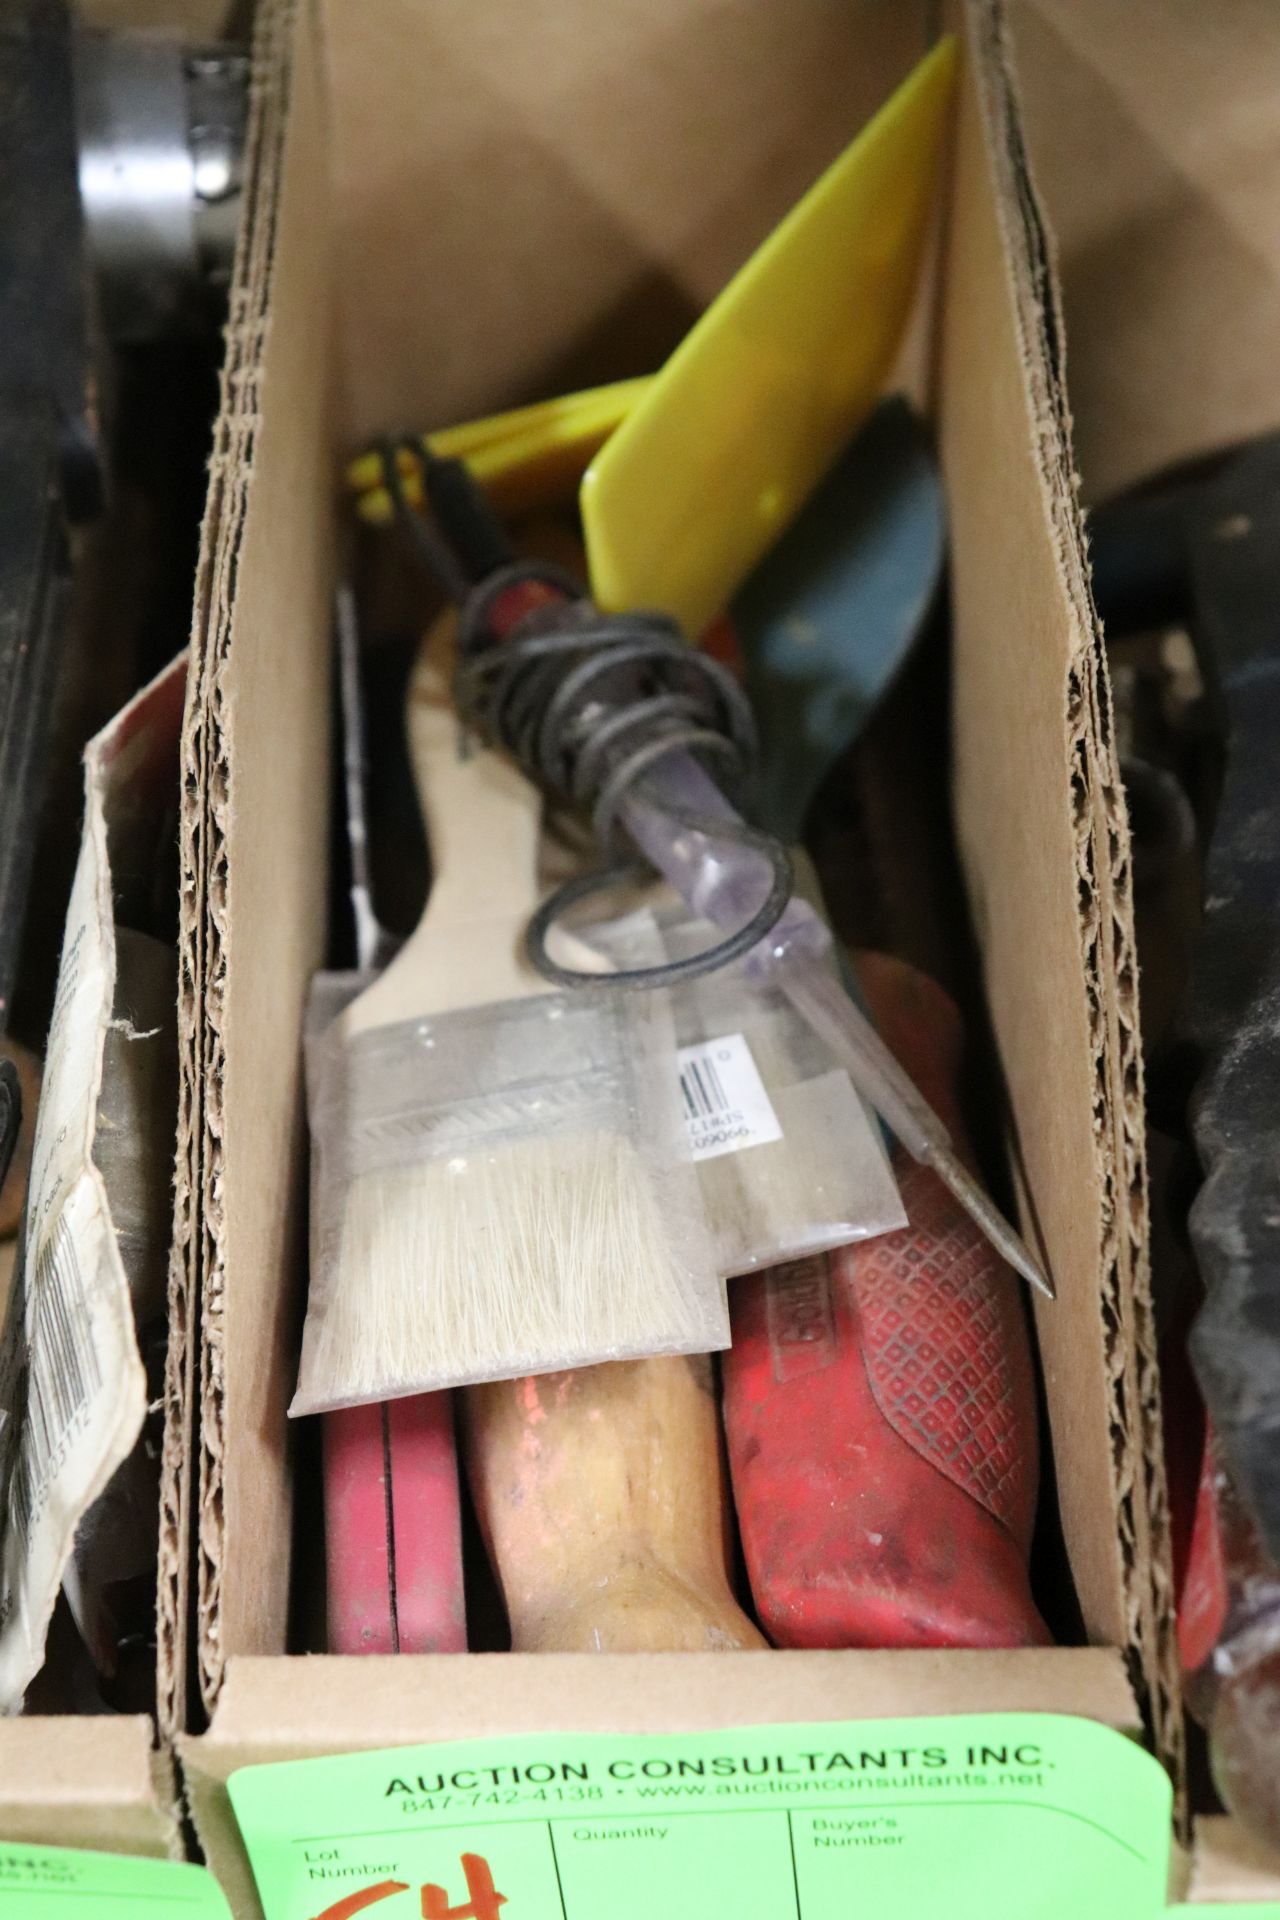 Miscellaneous saws and paintbrushes